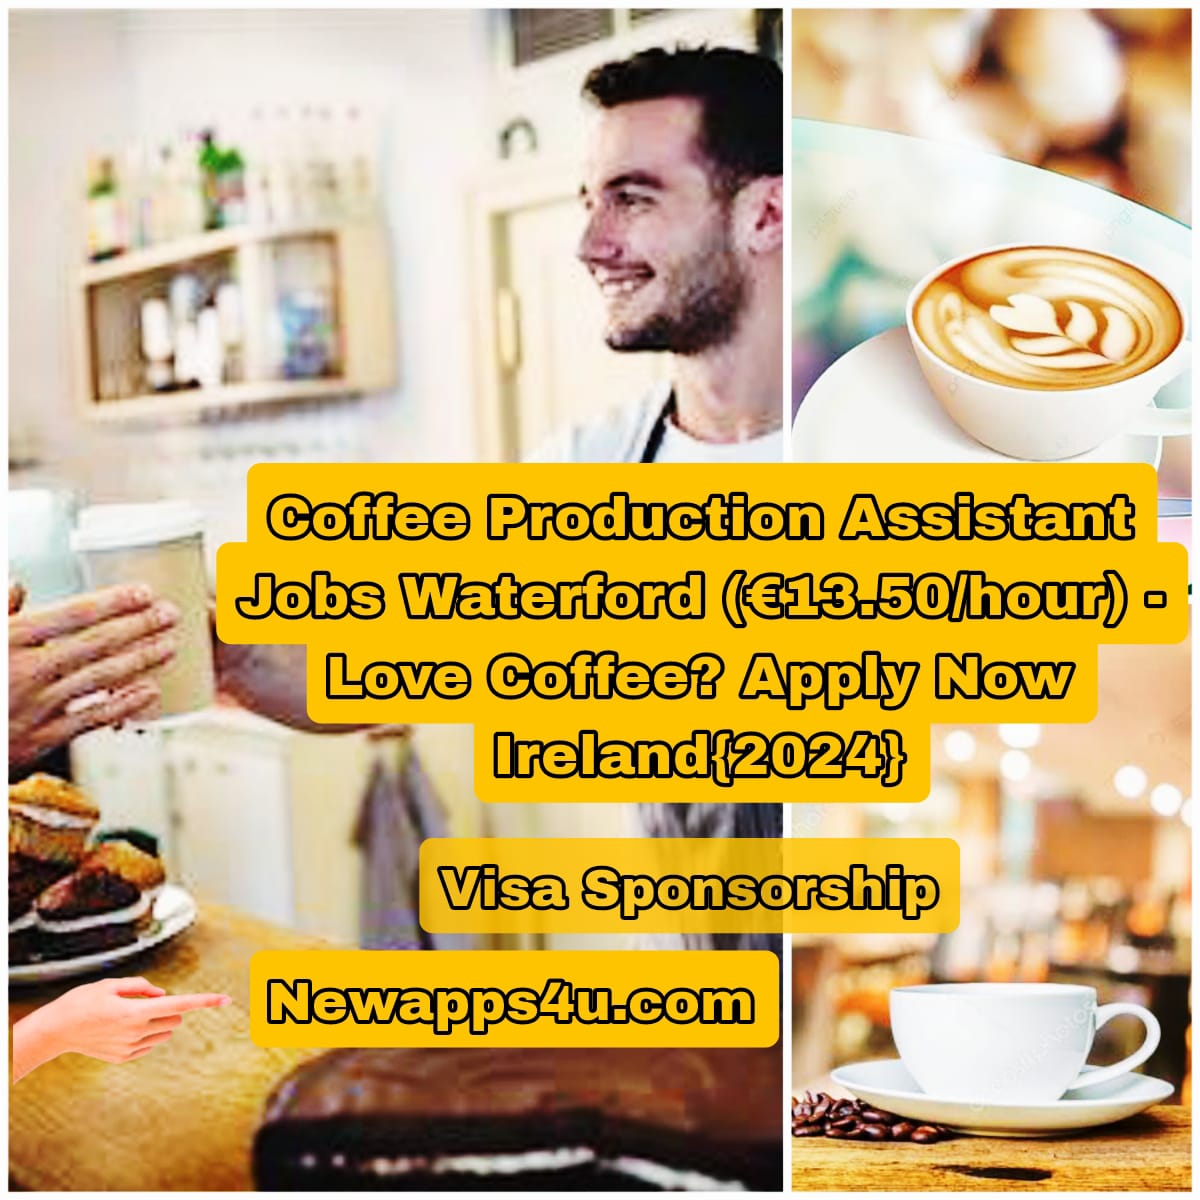 Coffee Production Assistant Jobs Waterford (€13.50/hour) - Love Coffee? Apply Now Ireland{2024}